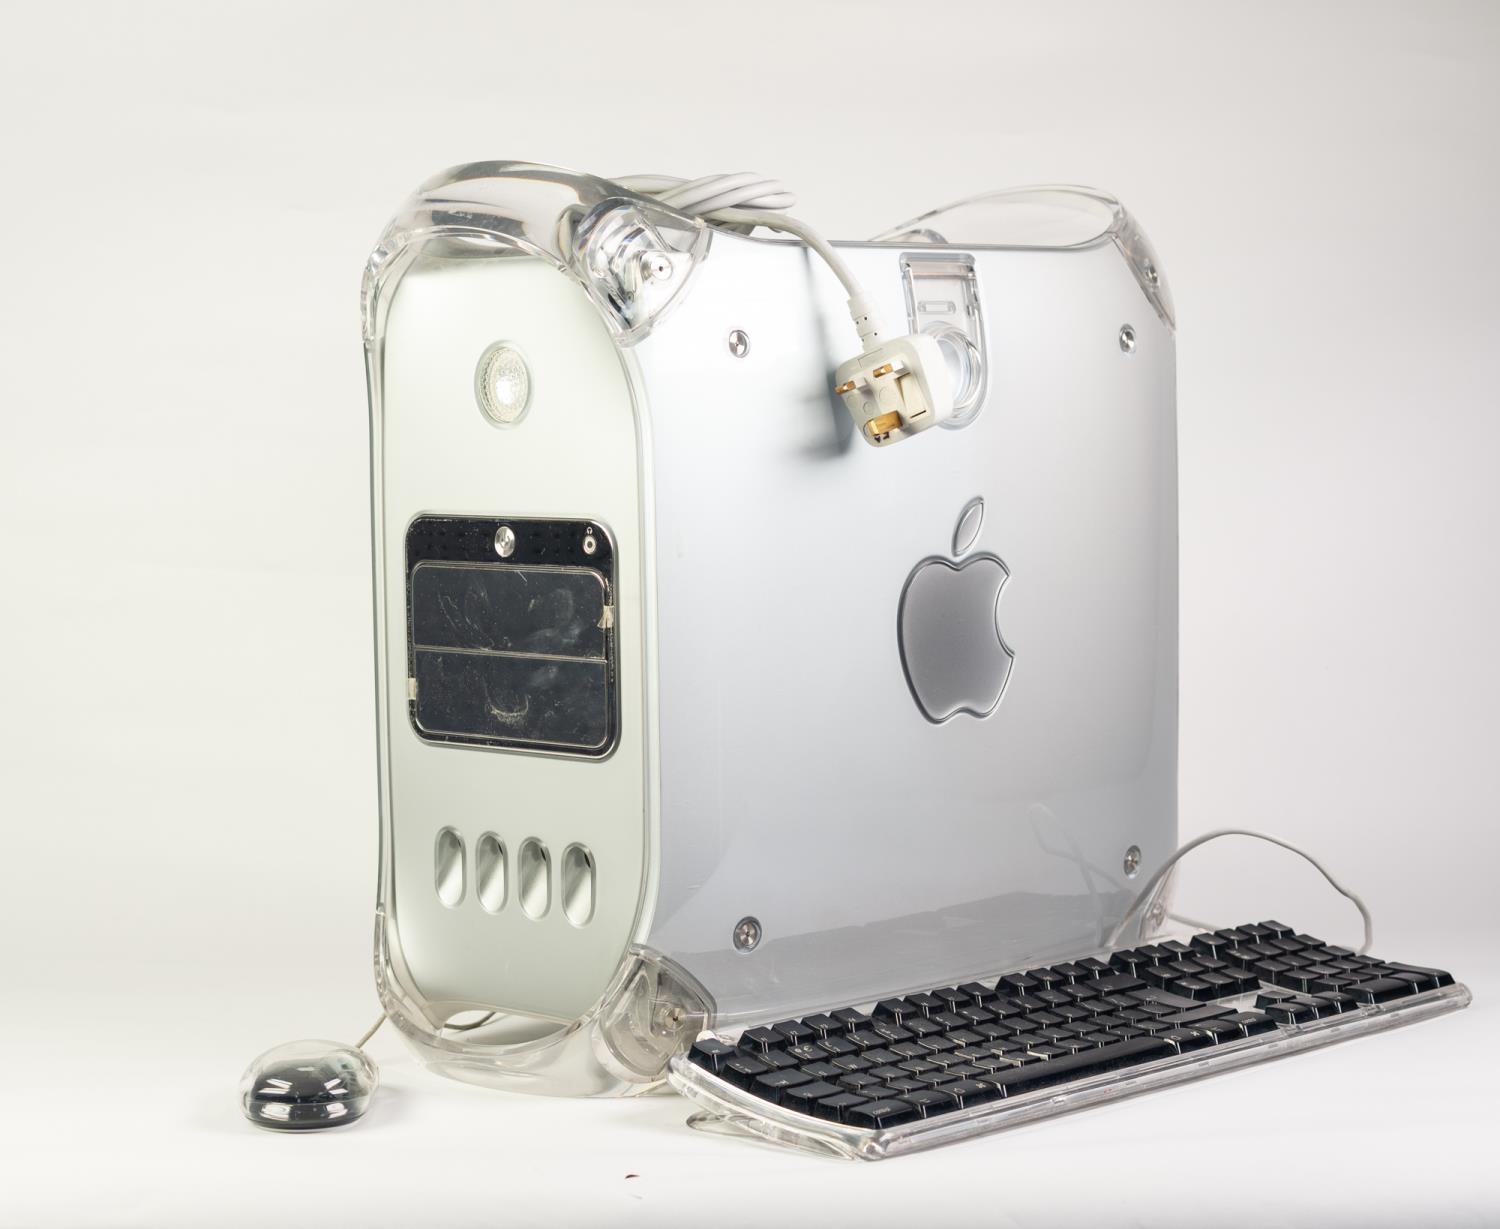 APPLE POWER MAC G4, MODEL NO.M8570, with power lead with apple pro keyboard & apple pro mouse in